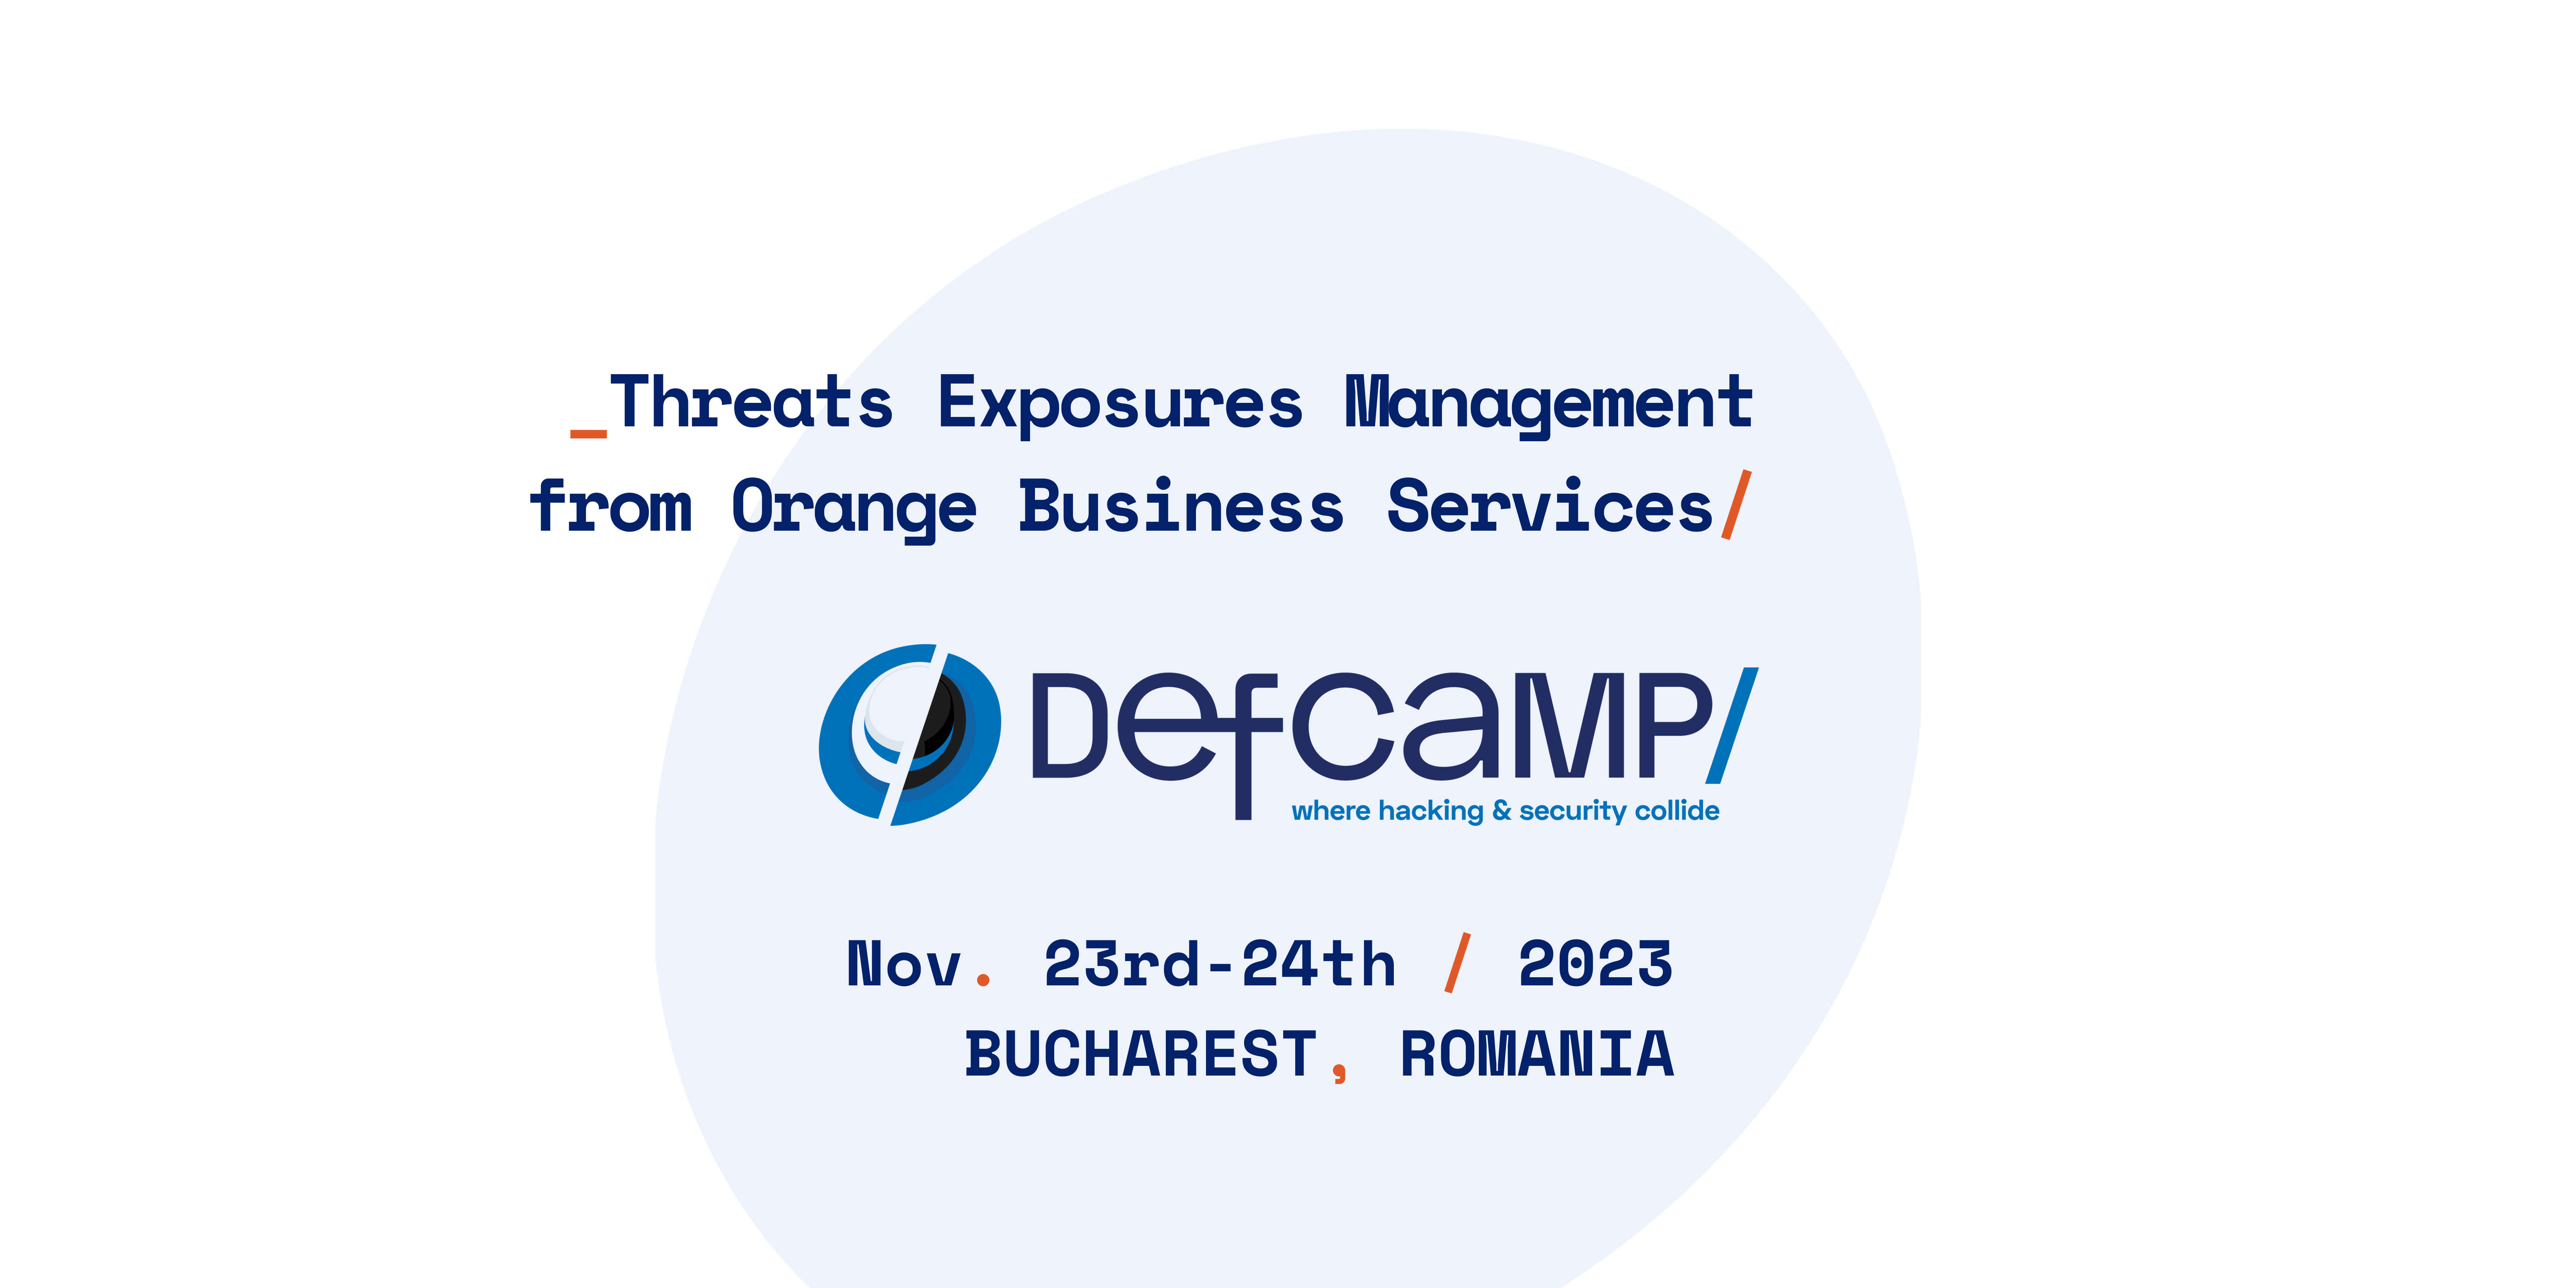 Threats Exposures Management from Orange Business Services